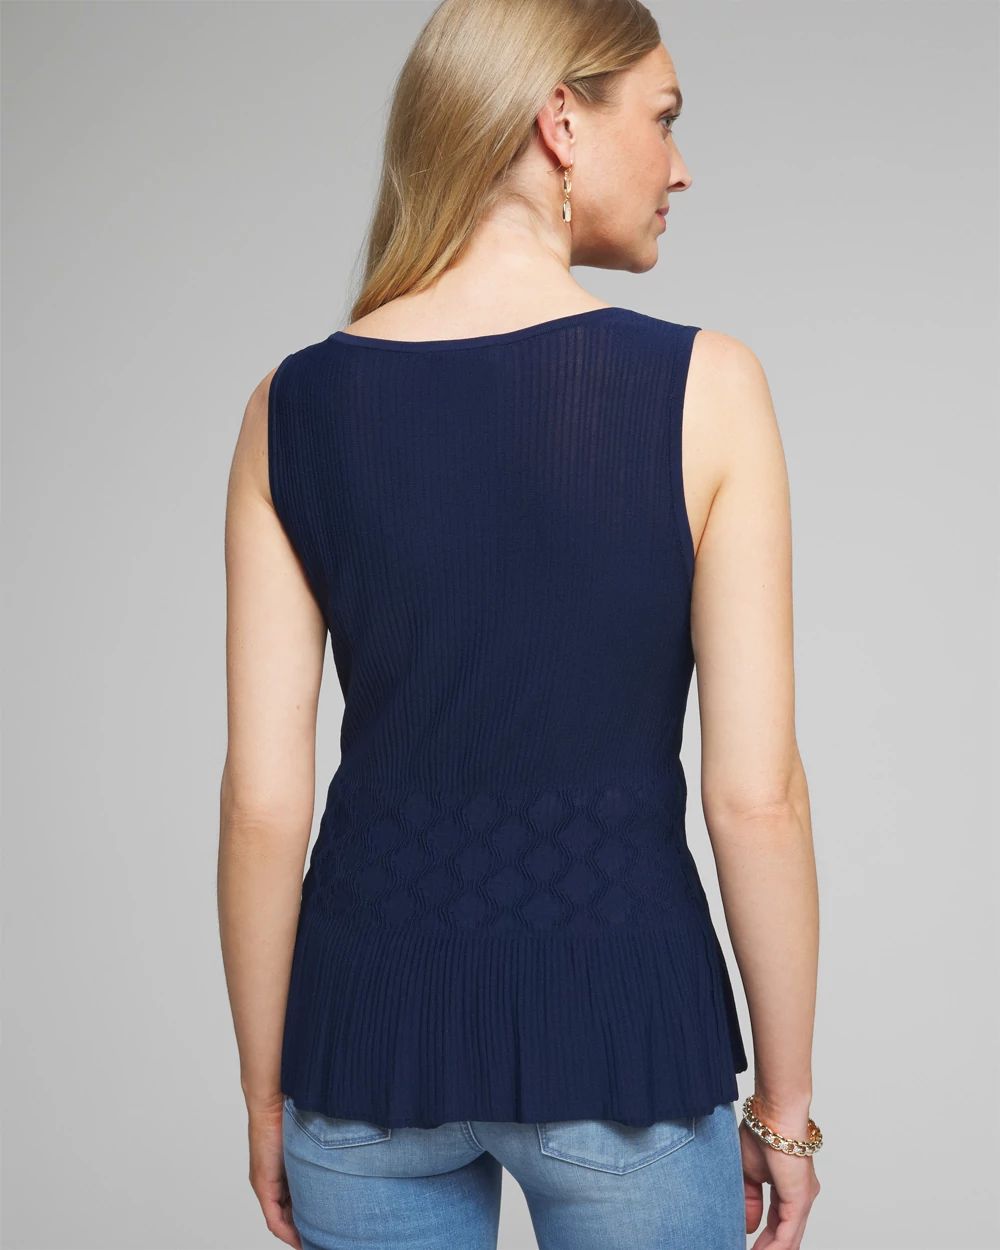 Outlet WHBM Sleeveless Multi Stitch Peplum Top click to view larger image.